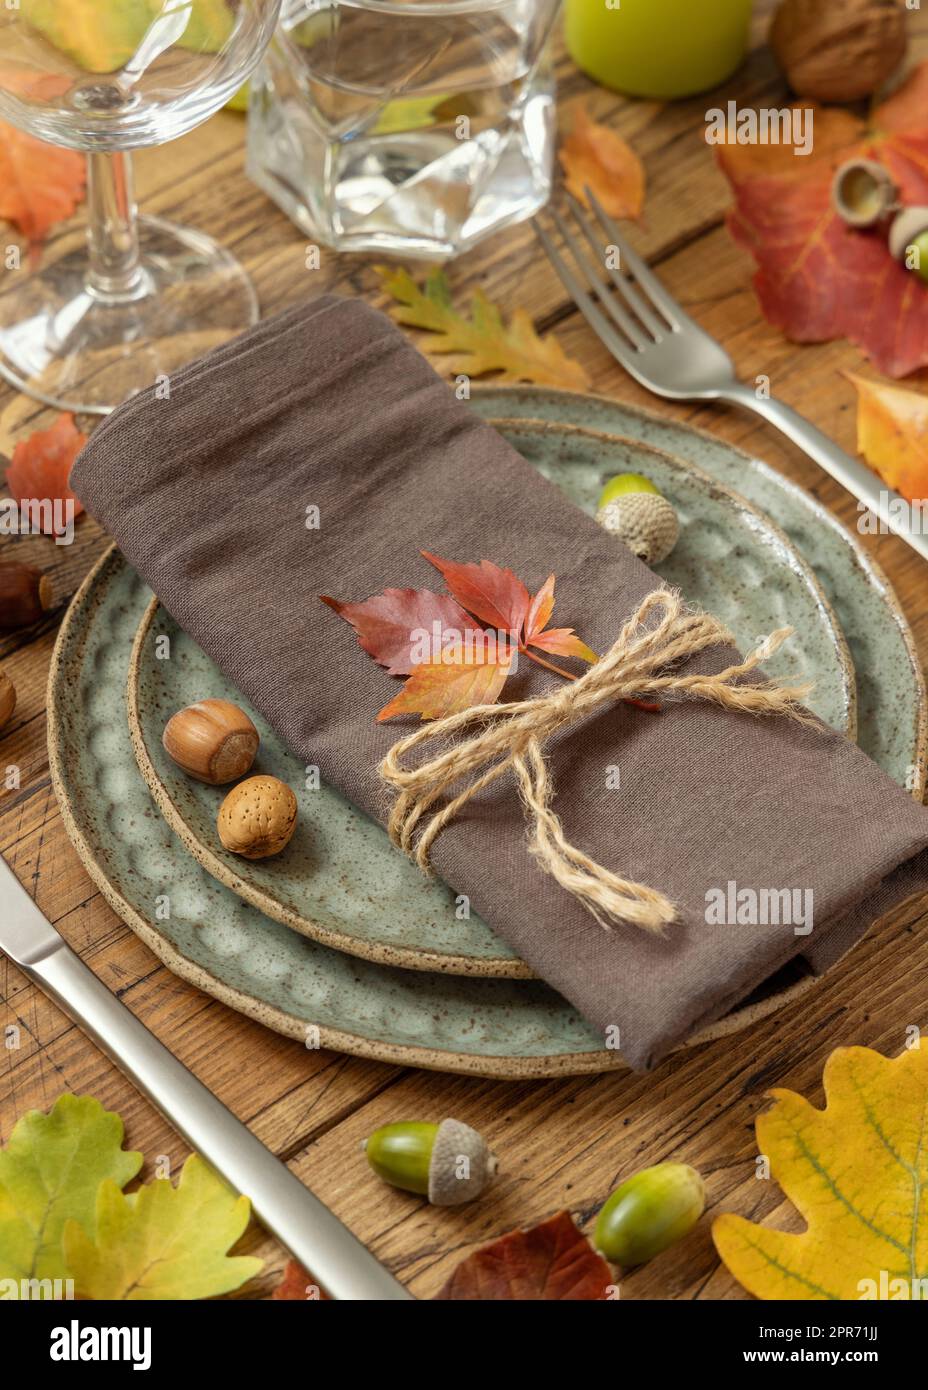 Autumn rustic table setting between leaves and berries on vintage wooden table close up Stock Photo